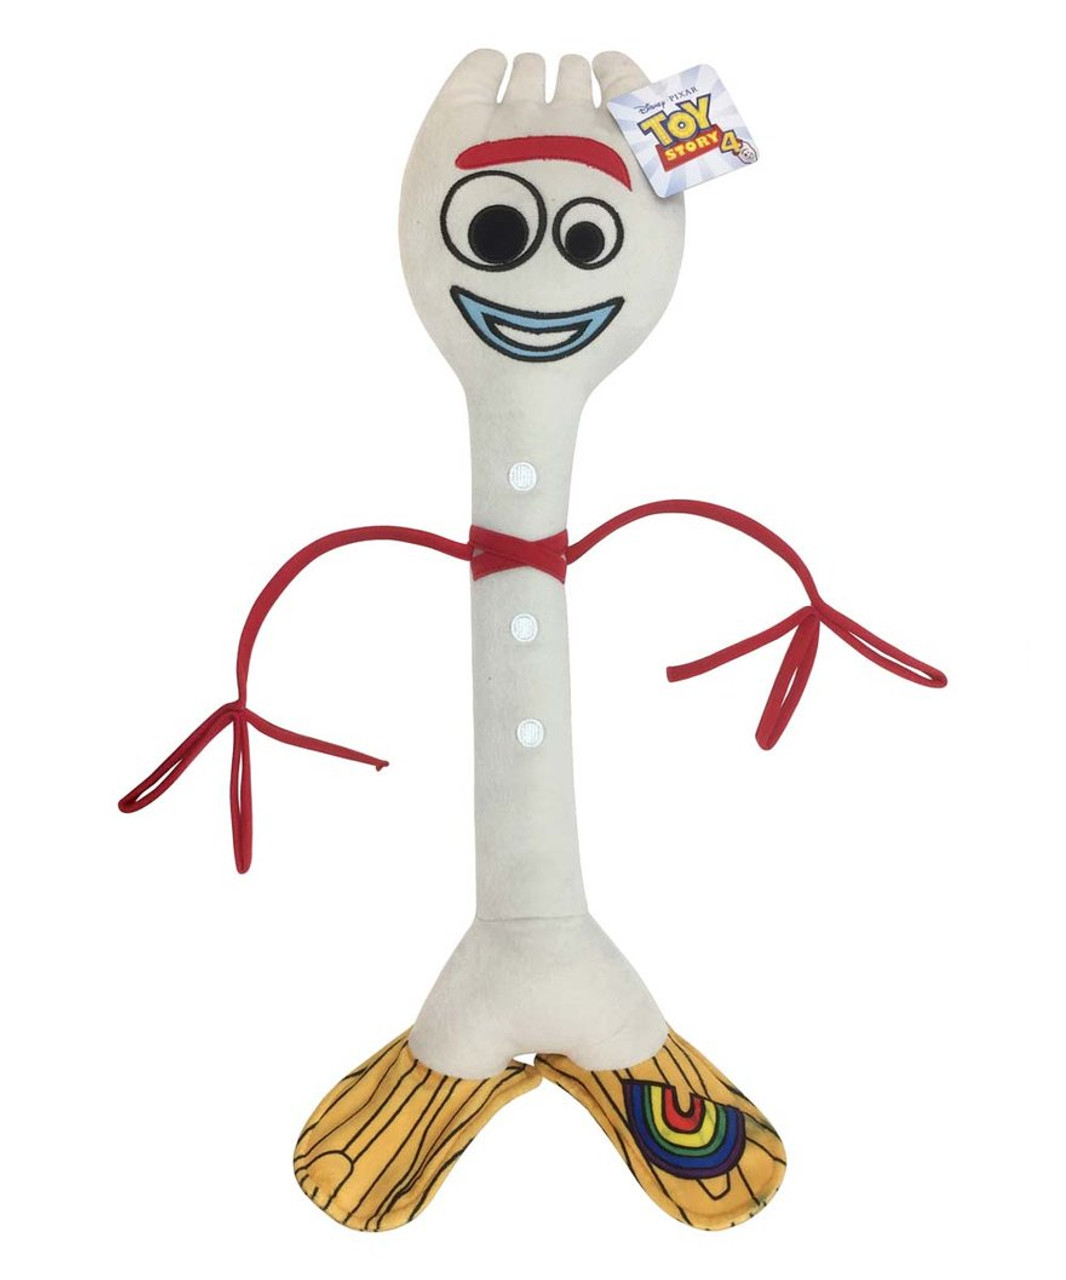 Disney/Pixar Toy Story 4 Forky Plush Toy - New in packaging